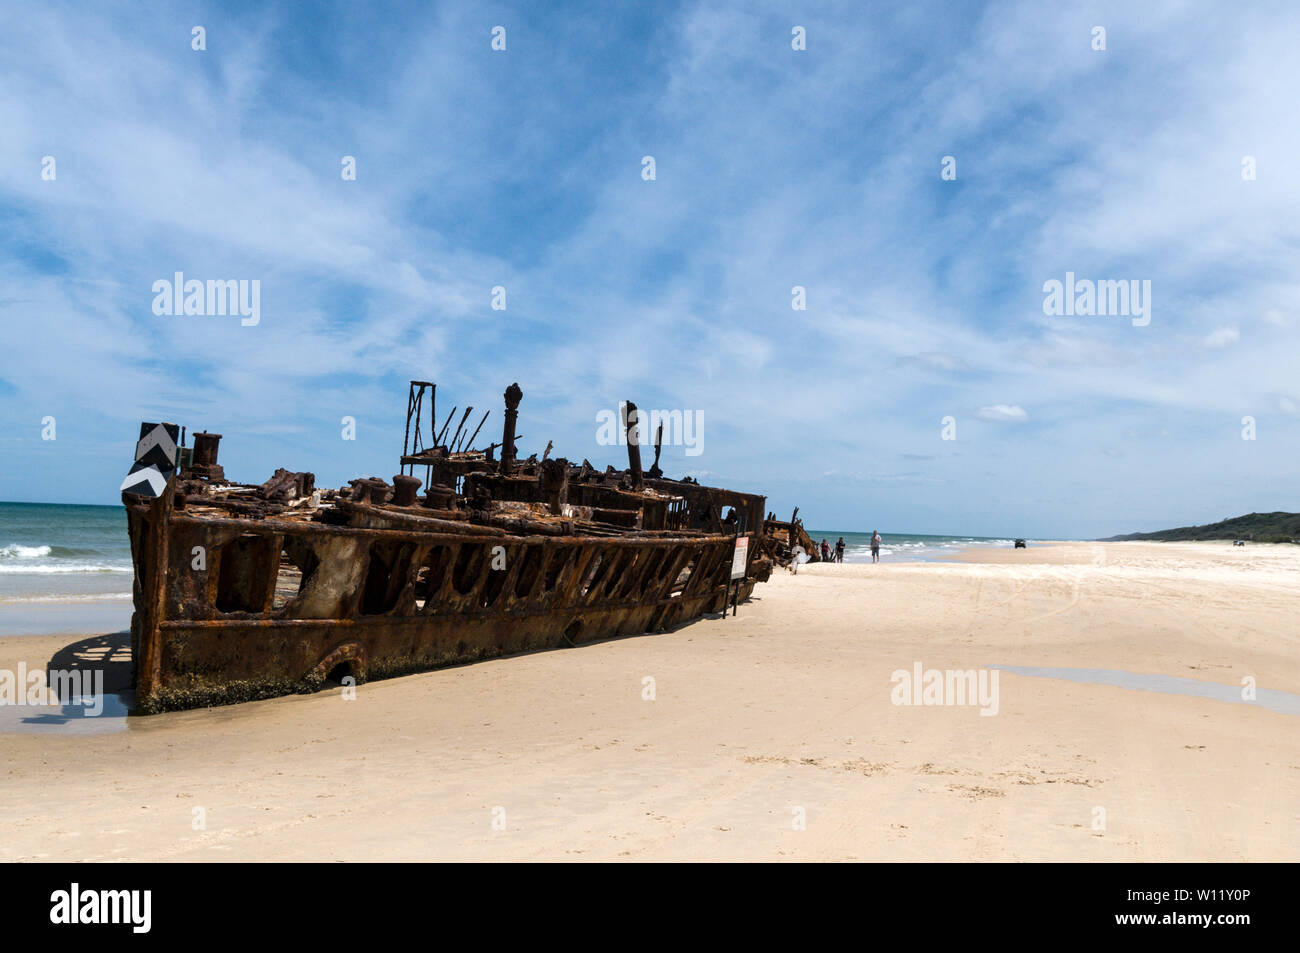 The rusted shipwreck of a New Zeland hospital ship, the SS Maheno, is a landmark on the 75-mile beach facing the Coral Sea on Fraser Island, Queensland Stock Photo